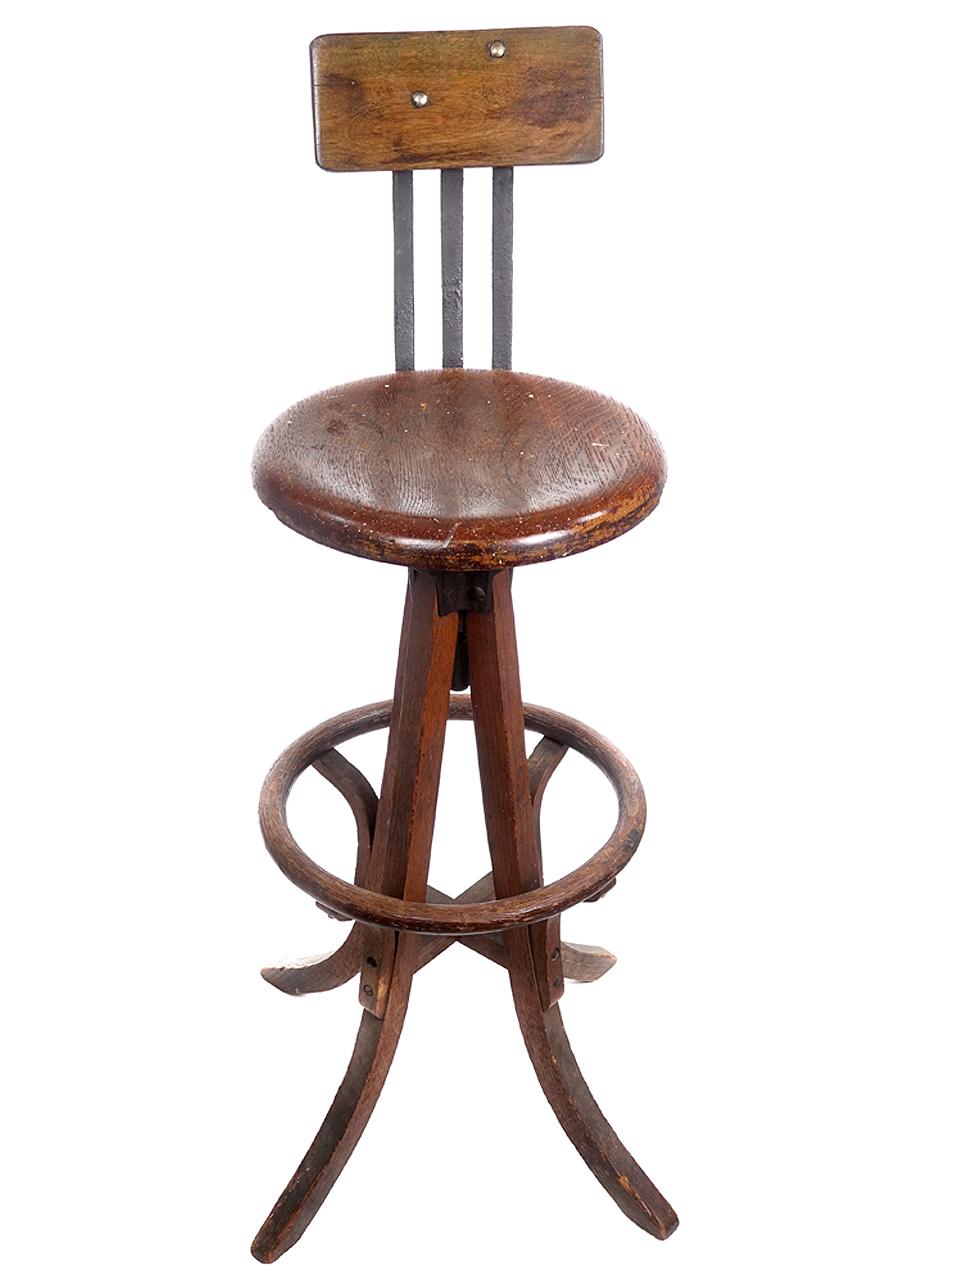 This is a beautiful single painters or draftsman's swivel stool. The back is oak and cast iron with a bentwood footrest. It has a nice old patina.